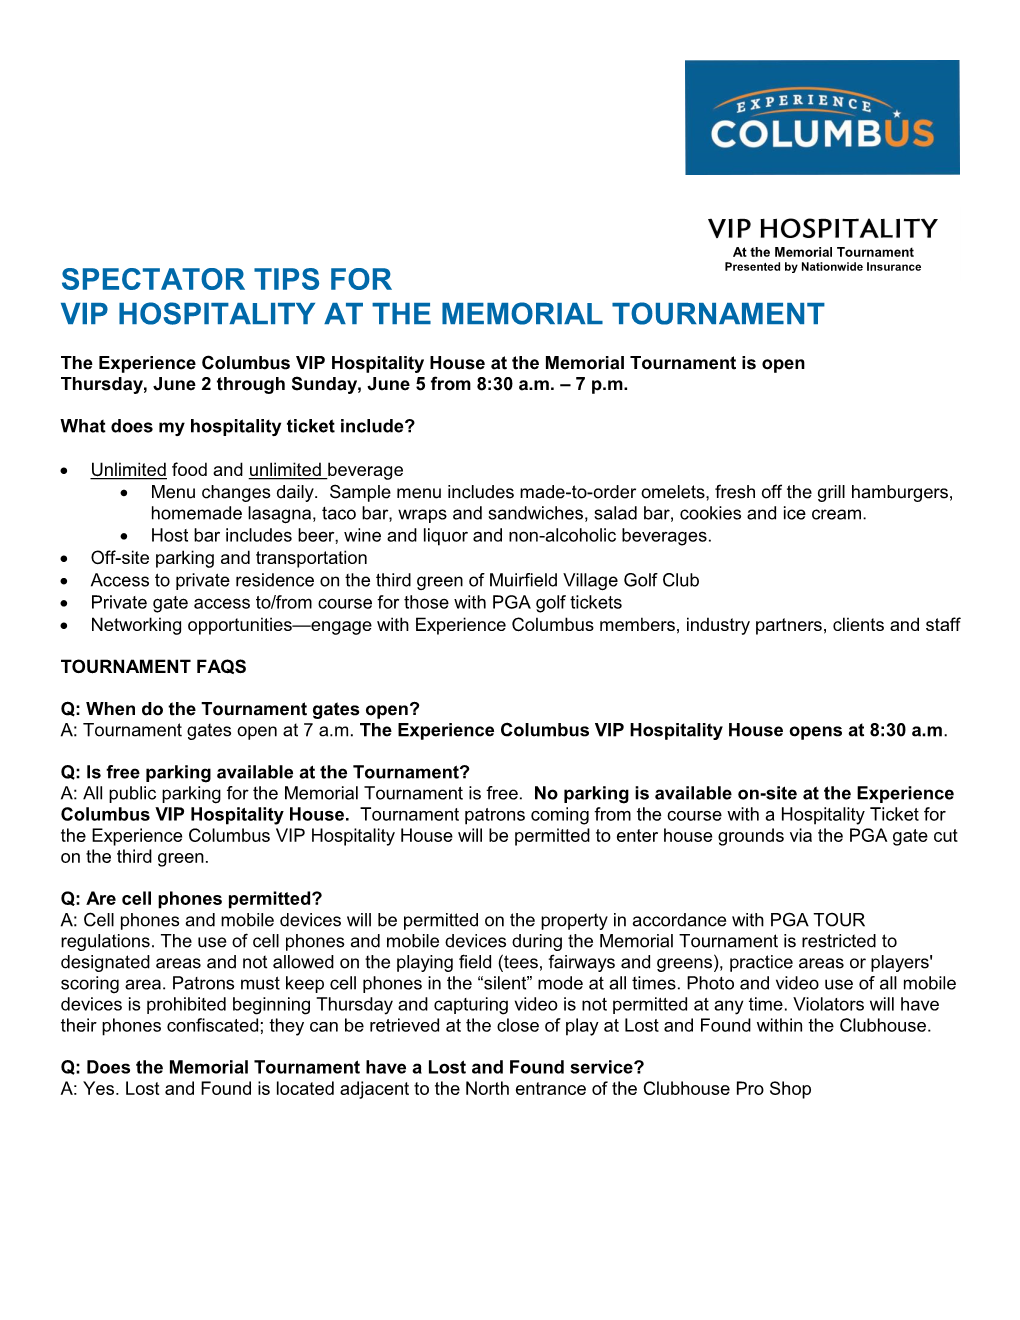 Spectator Tips for Vip Hospitality at the Memorial Tournament